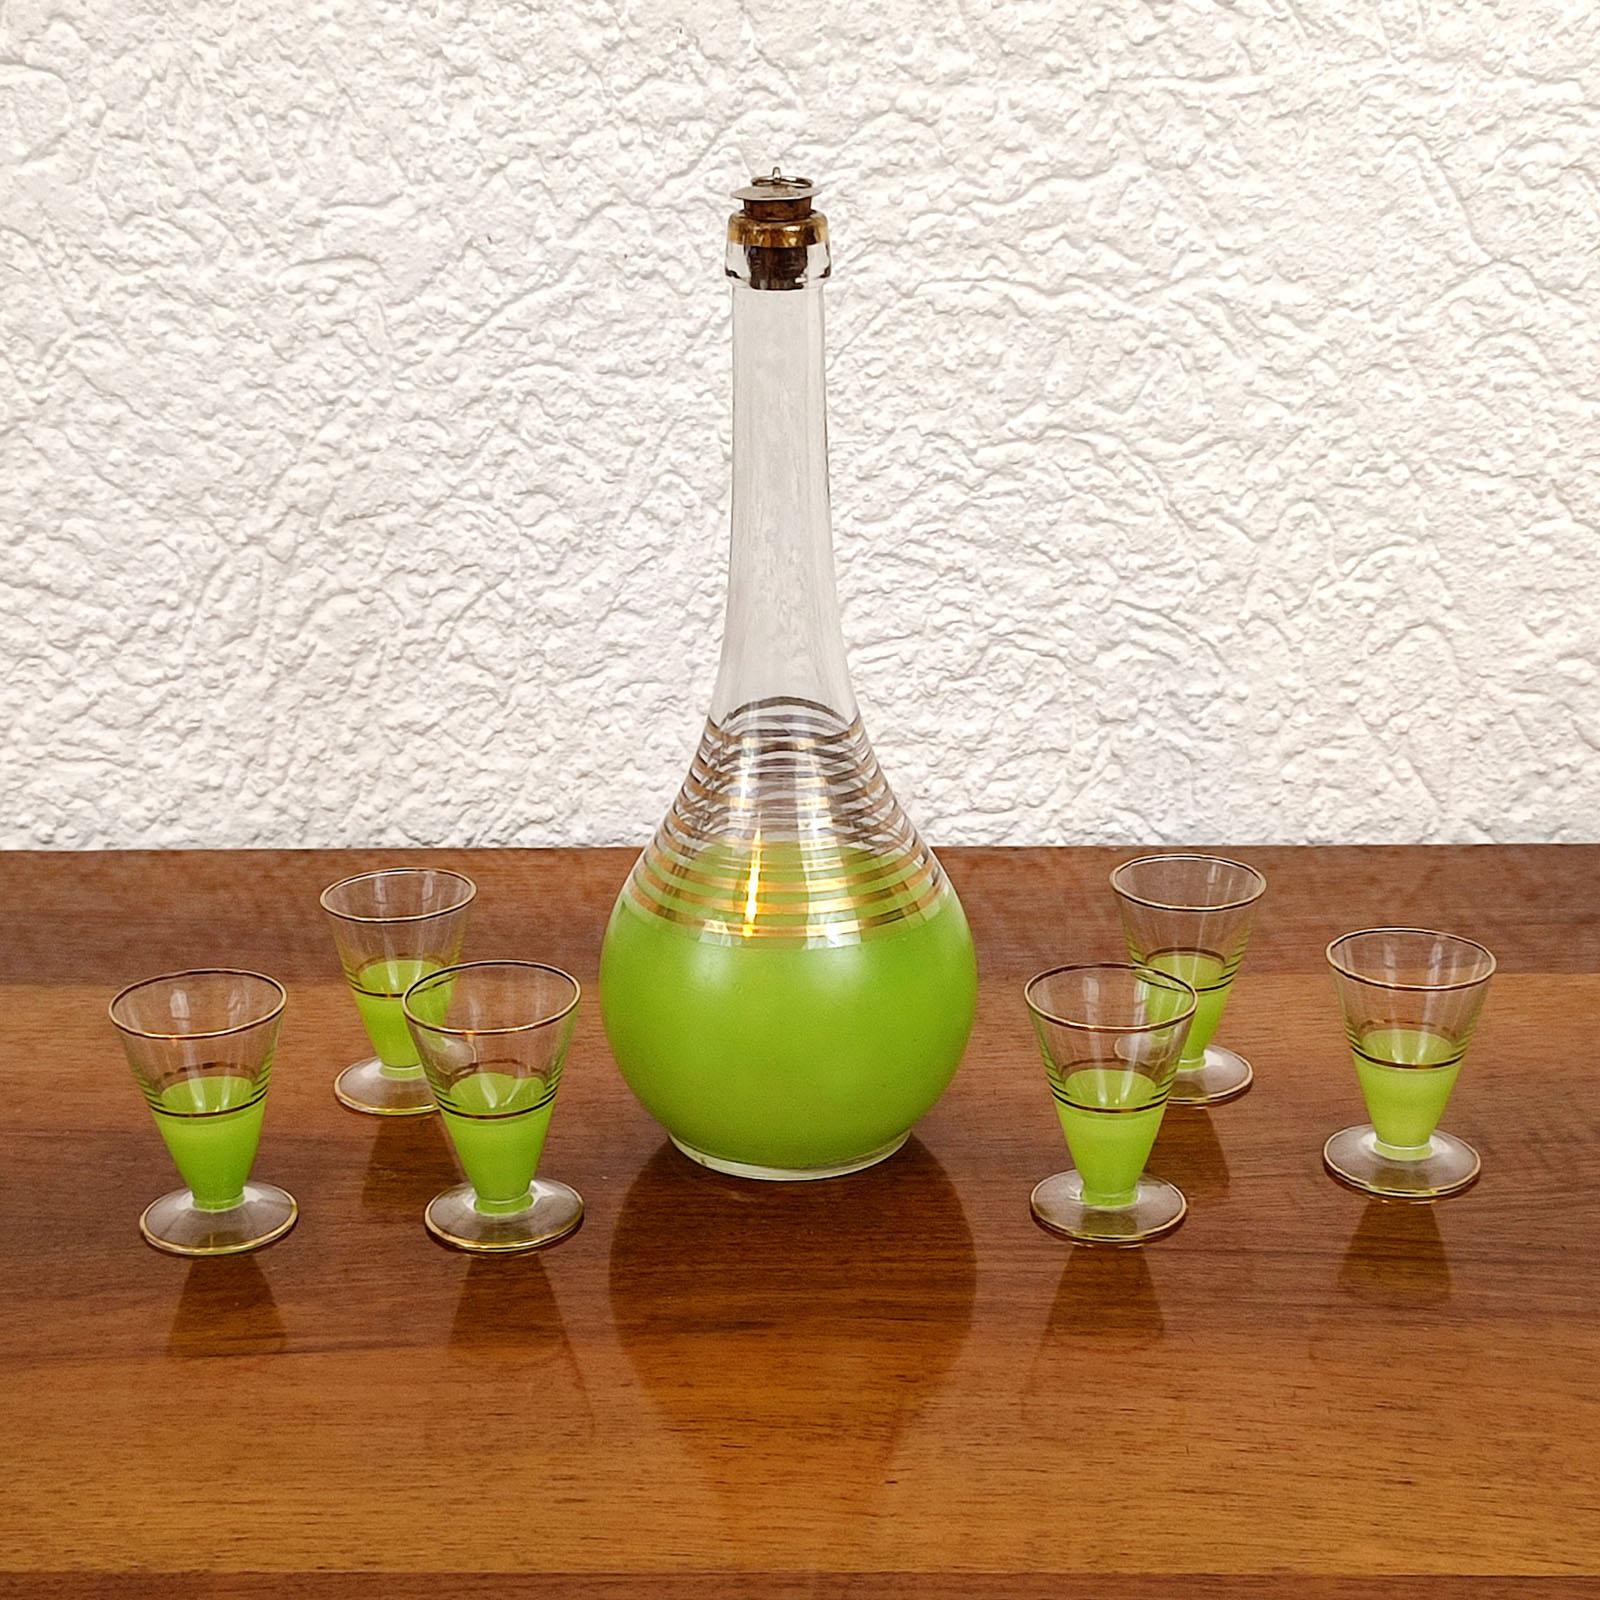 Italian glass decanter with 6 liquor glasses, originally made for a drink called Rosolio, but you could use it for which ever drink you like. Something where the light green color and gold accents of the glass come out the best we would say. In very